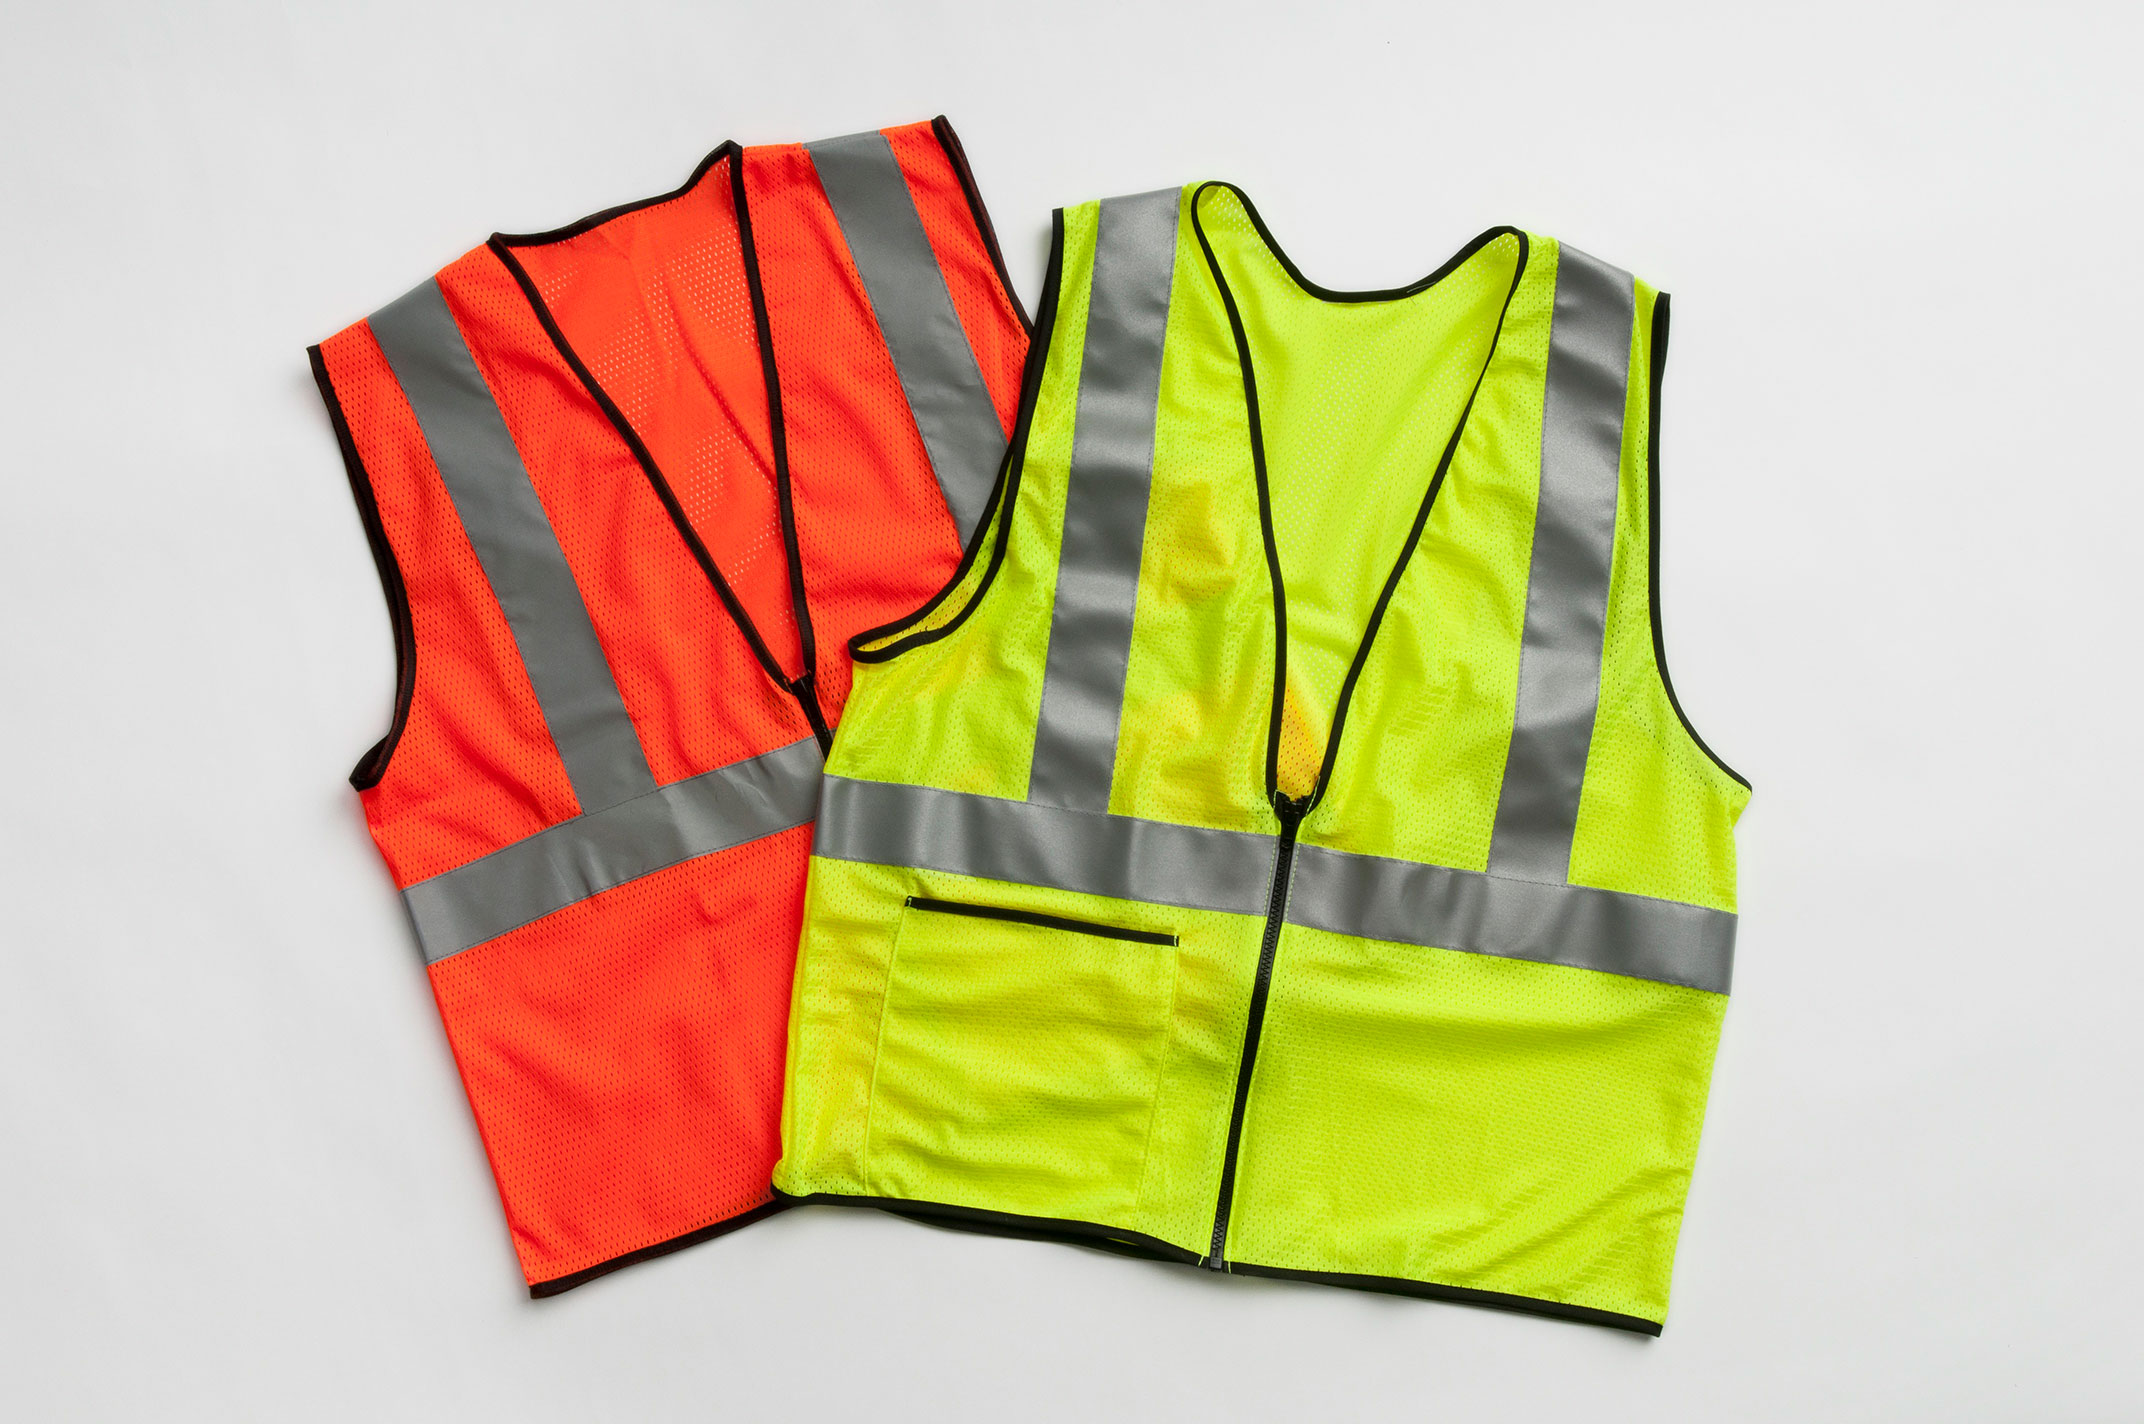 a display of safety vest in orange and yellow